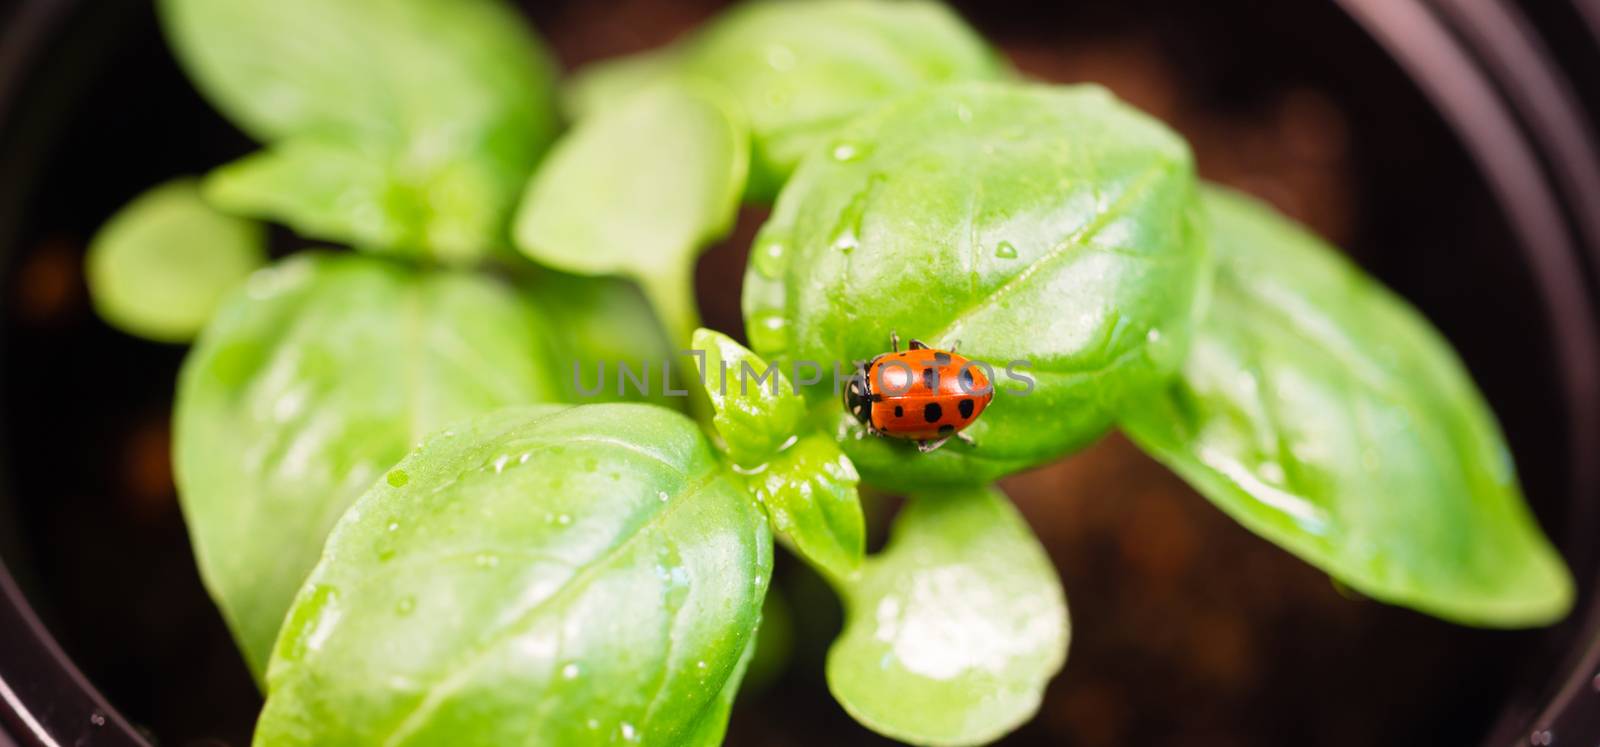 New Start PLant Sweet Basil Herb Leaf Ladybug Insect  by ChrisBoswell